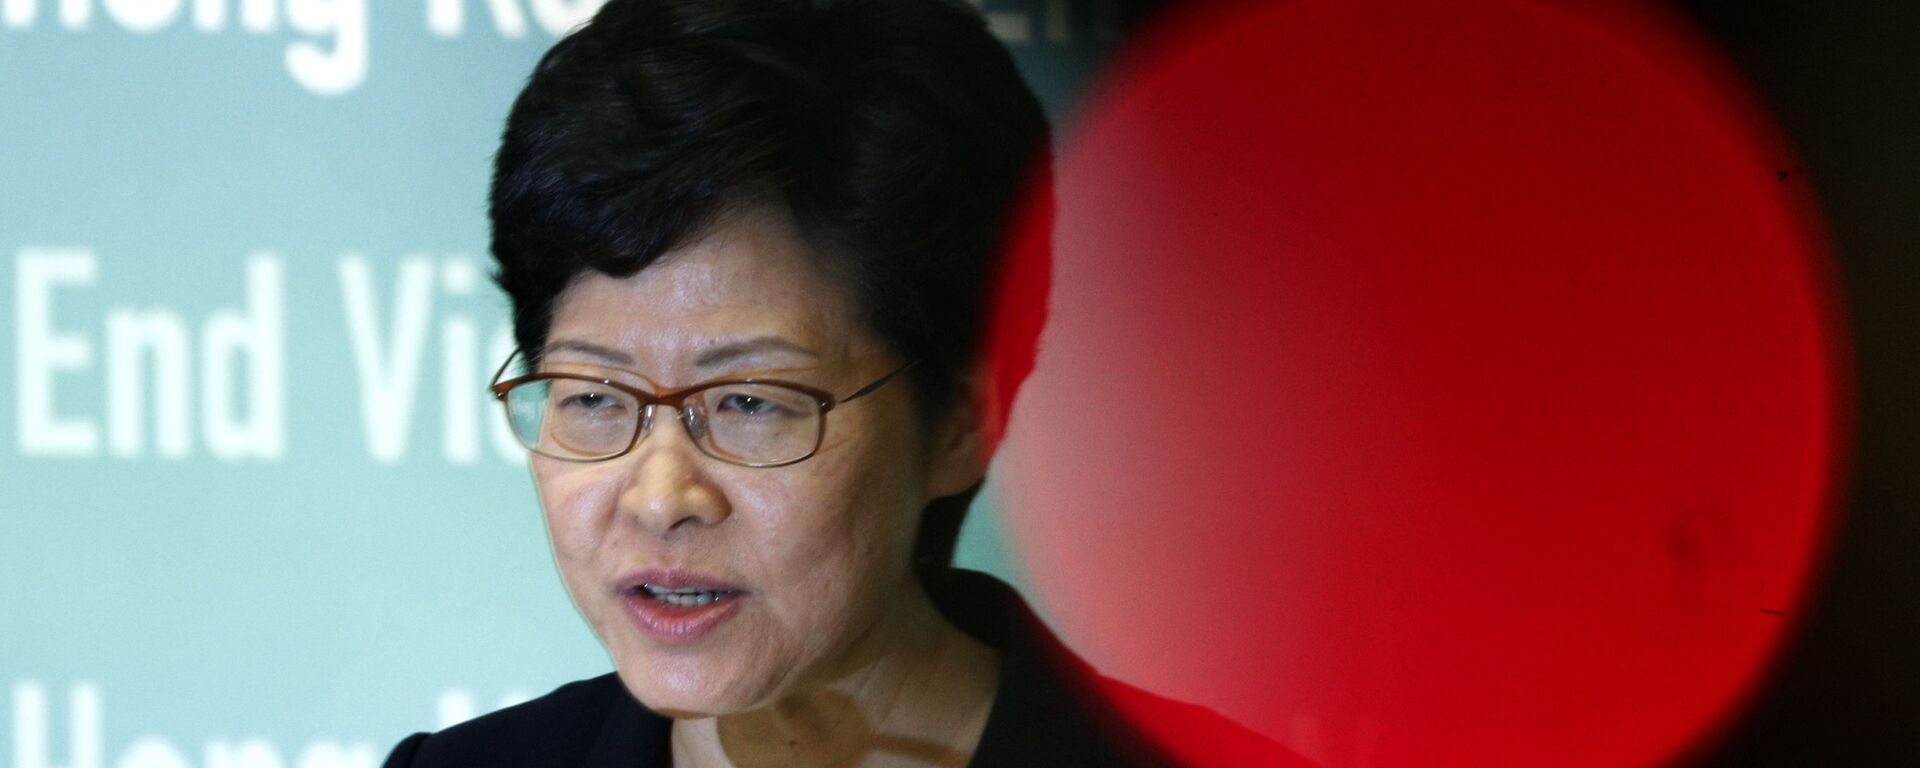 Hong Kong Chief Executive Carrie Lam speaks during a press conference held in Hong Kong on Friday, Oct. 4, 2019 - Sputnik International, 1920, 14.12.2021